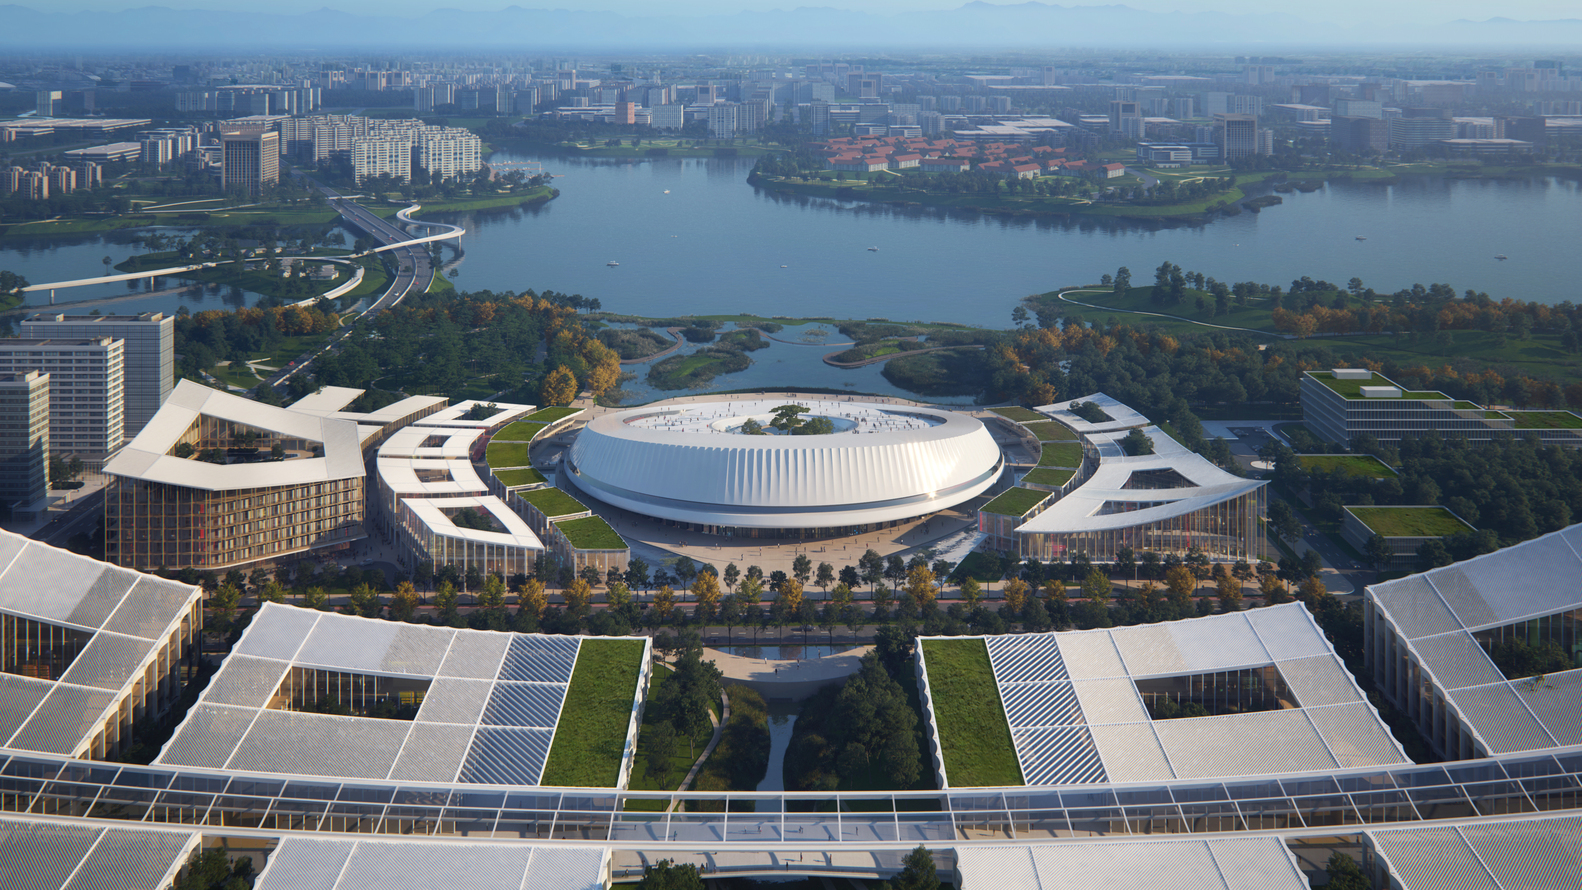 Centro Conferenze Internazionale a Pujiang - credits: henning larsen 